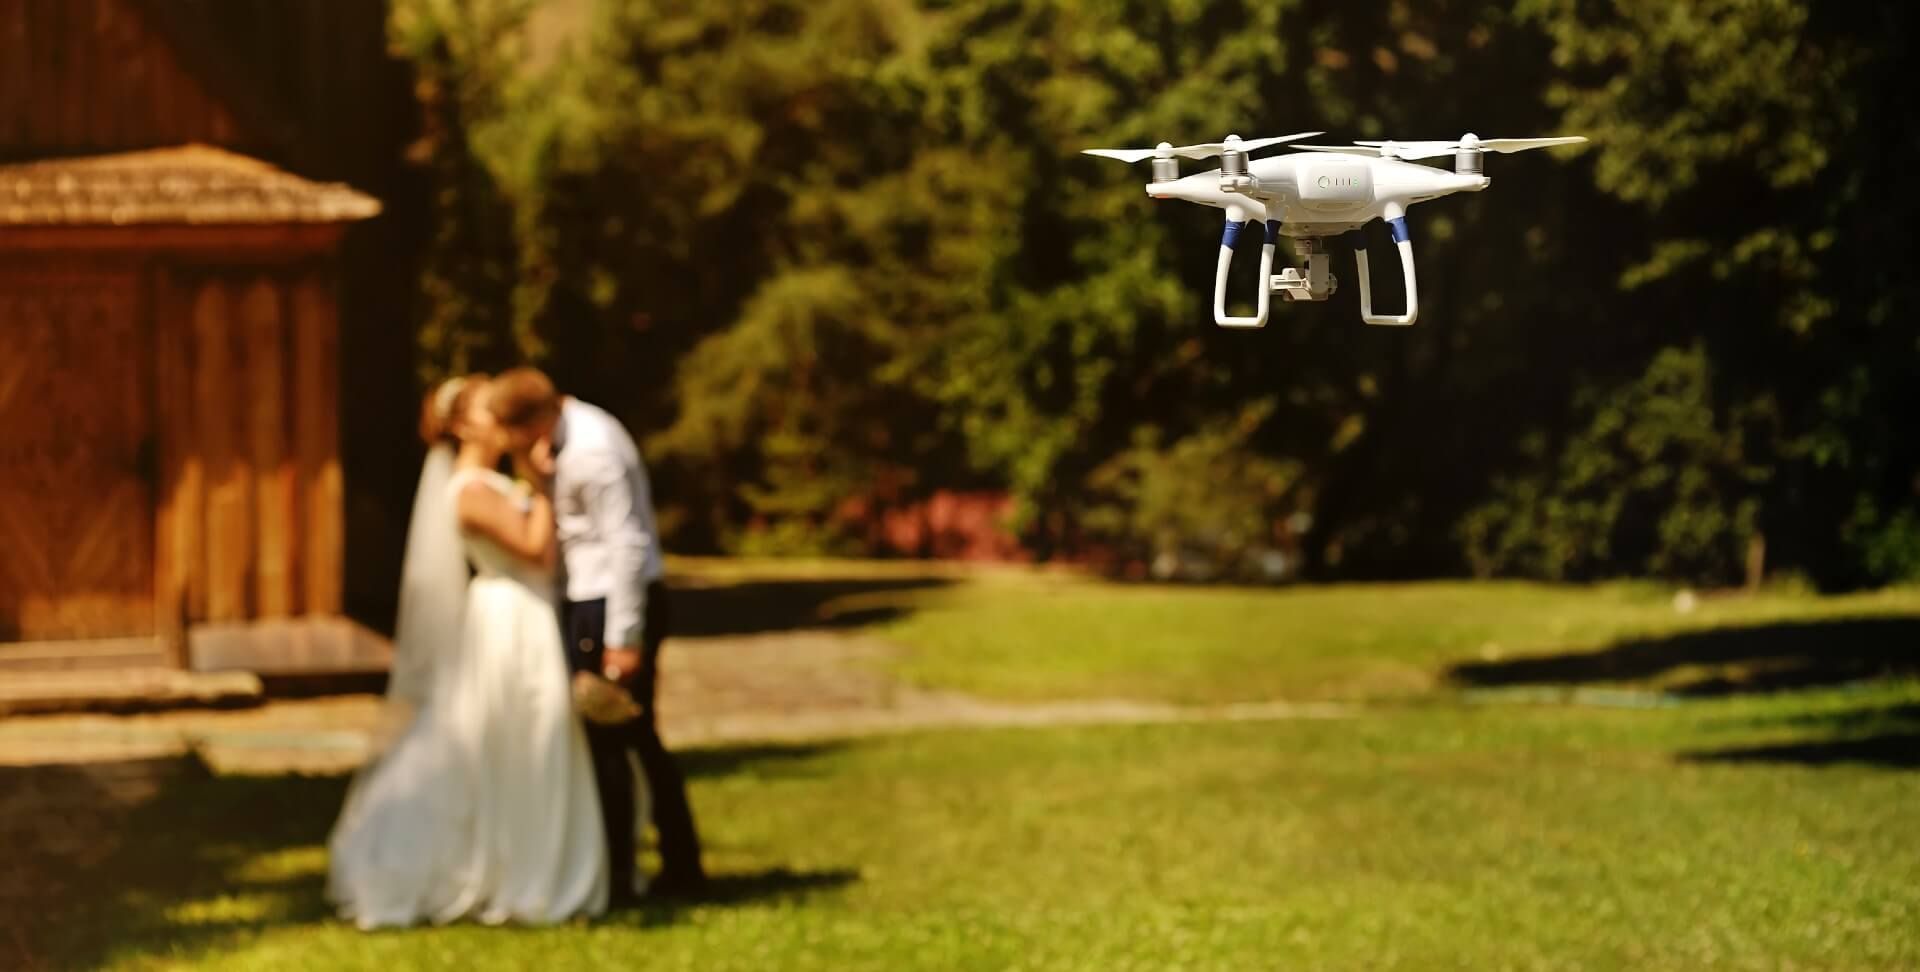 Bride and groom sharing a kiss while a drone films their moment